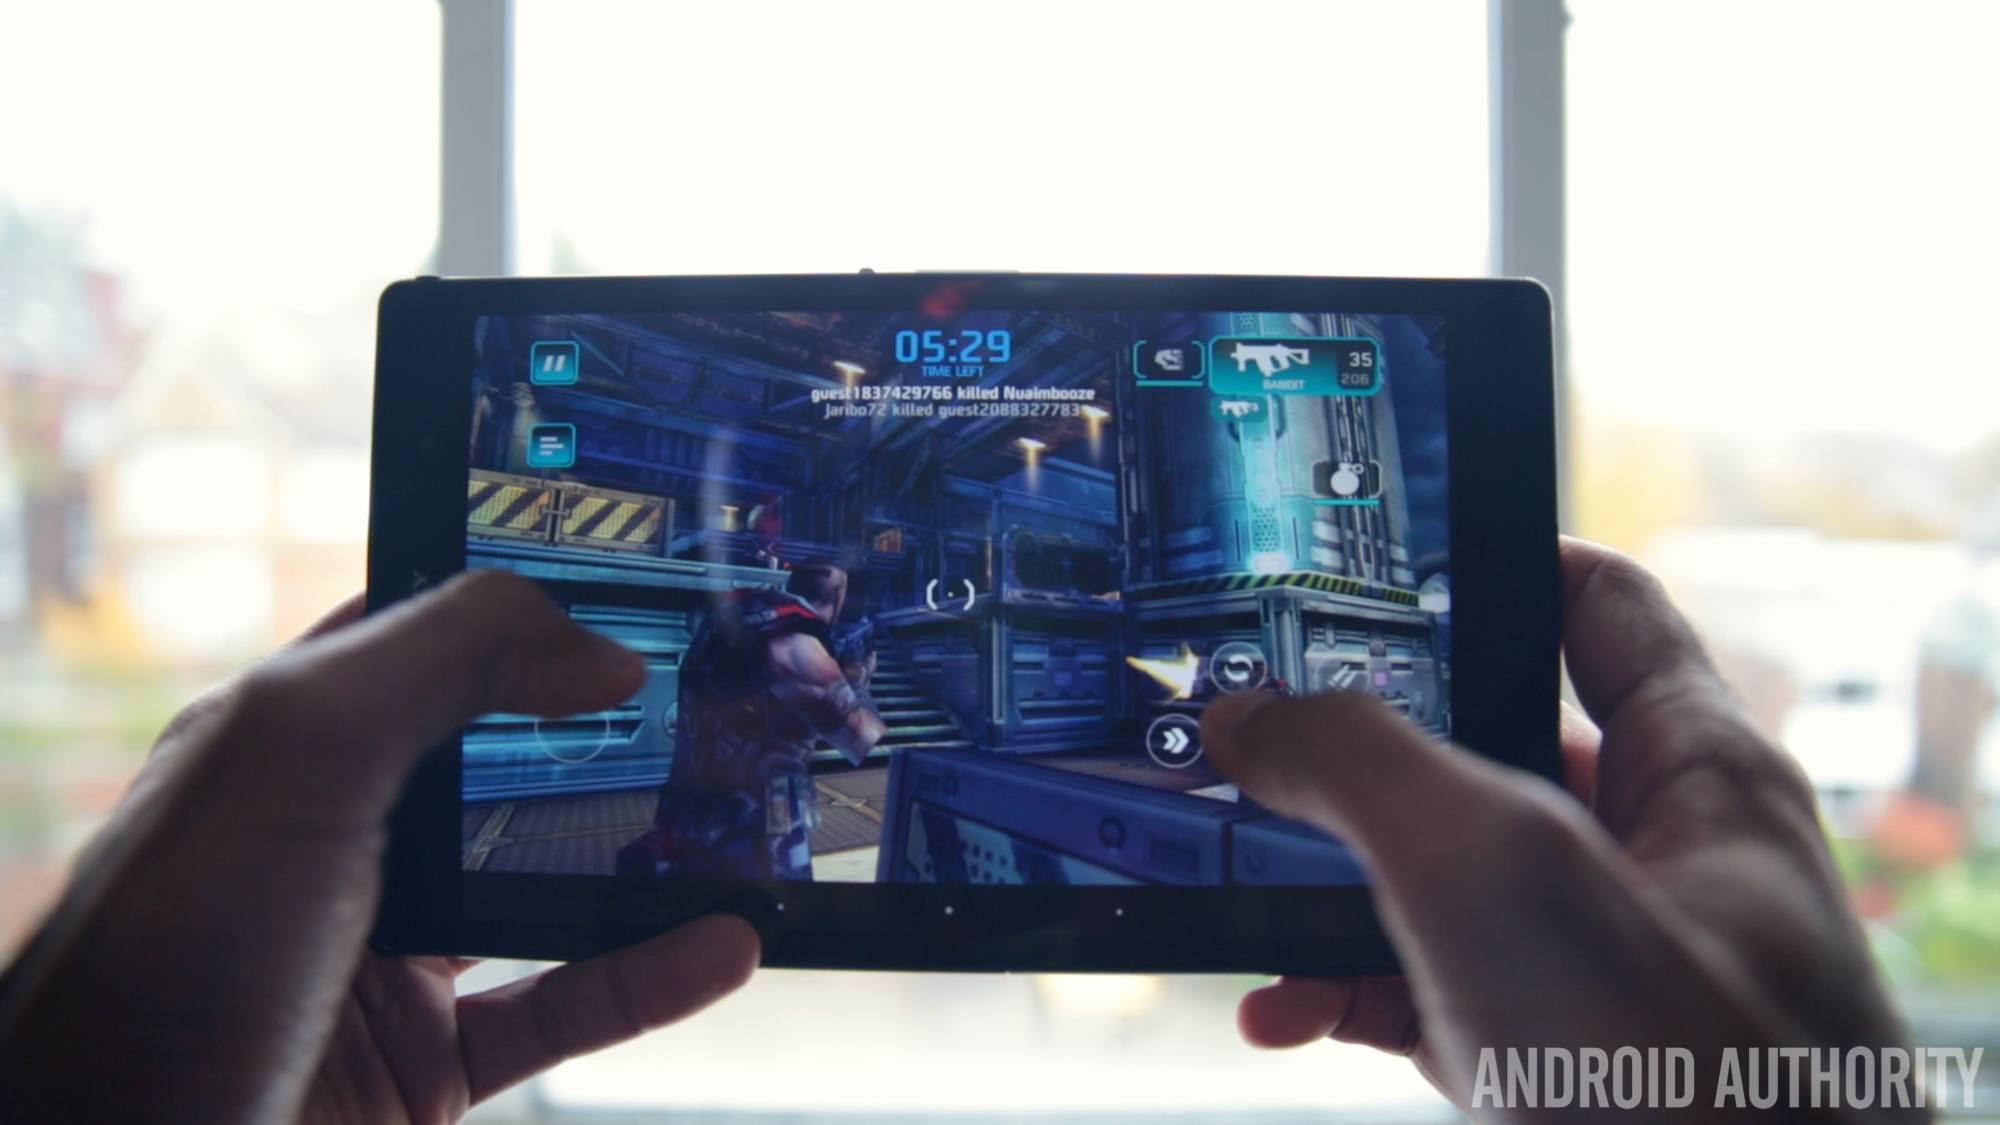 Sony Xperia Z3 Tablet Compact review: A skinny, waterproof tablet that  plays your PS4 games - CNET